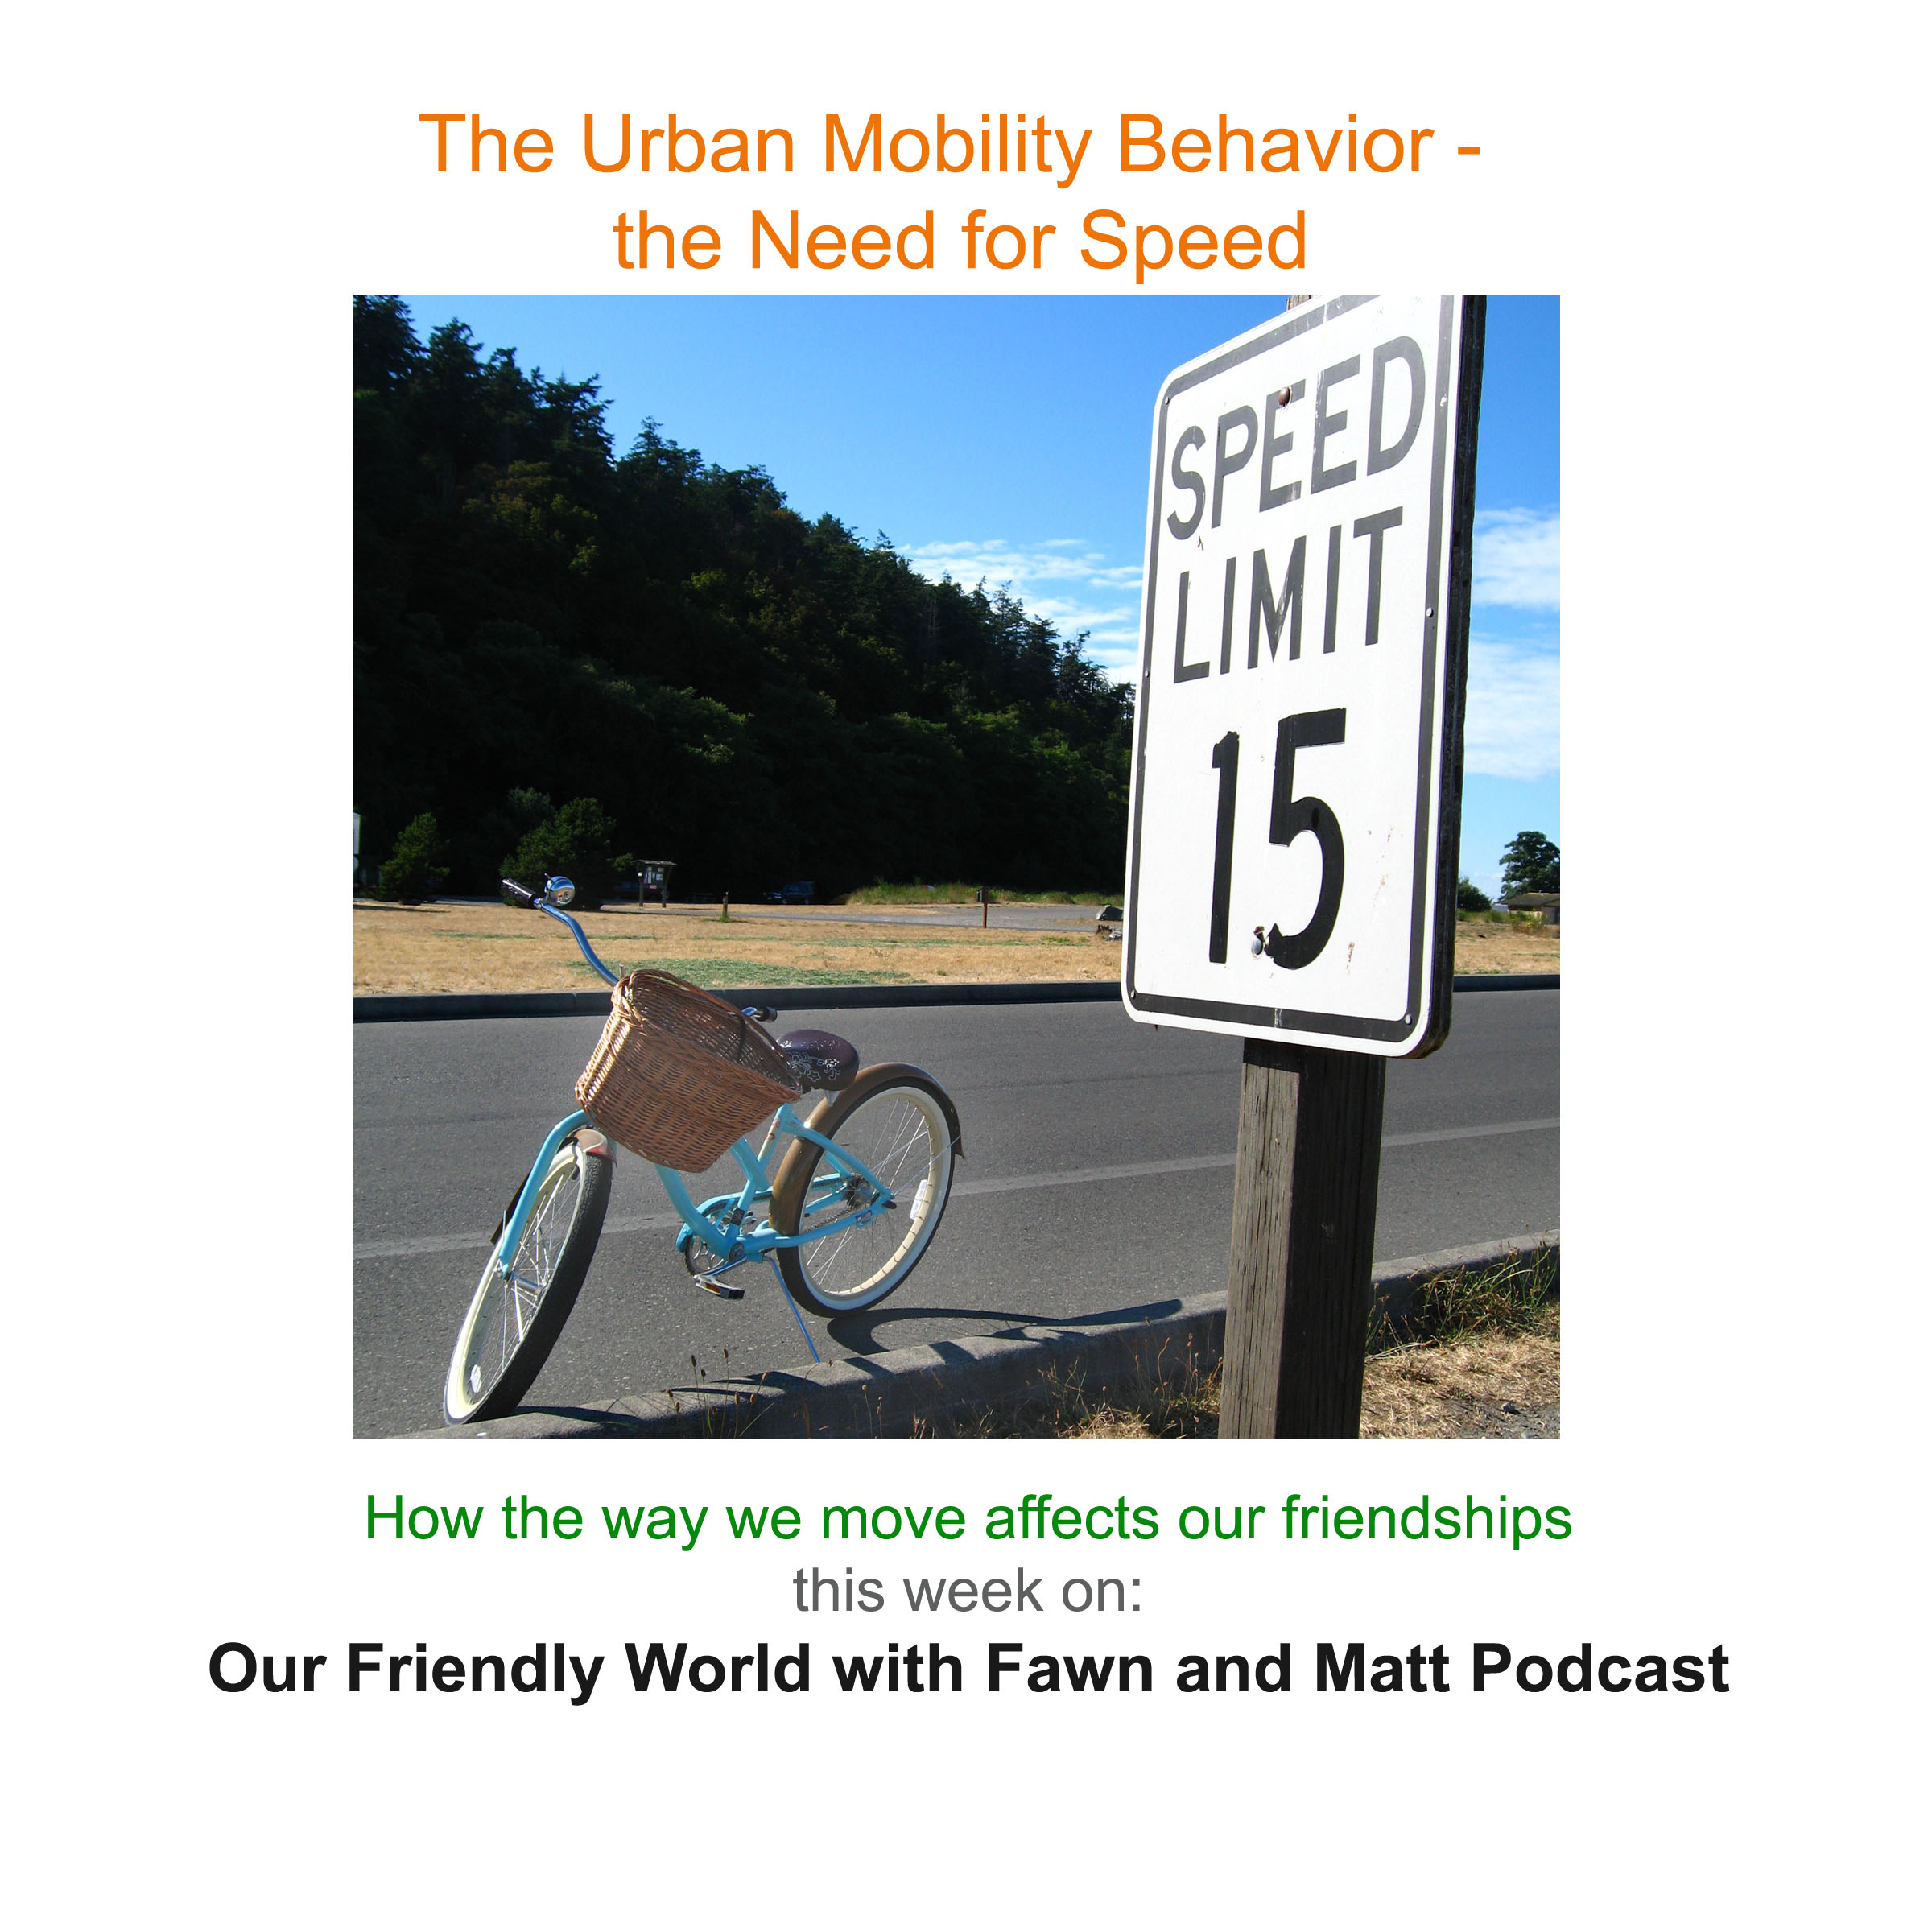 Urban Mobility Behavior - How the Way We Move Affects Our Friendships